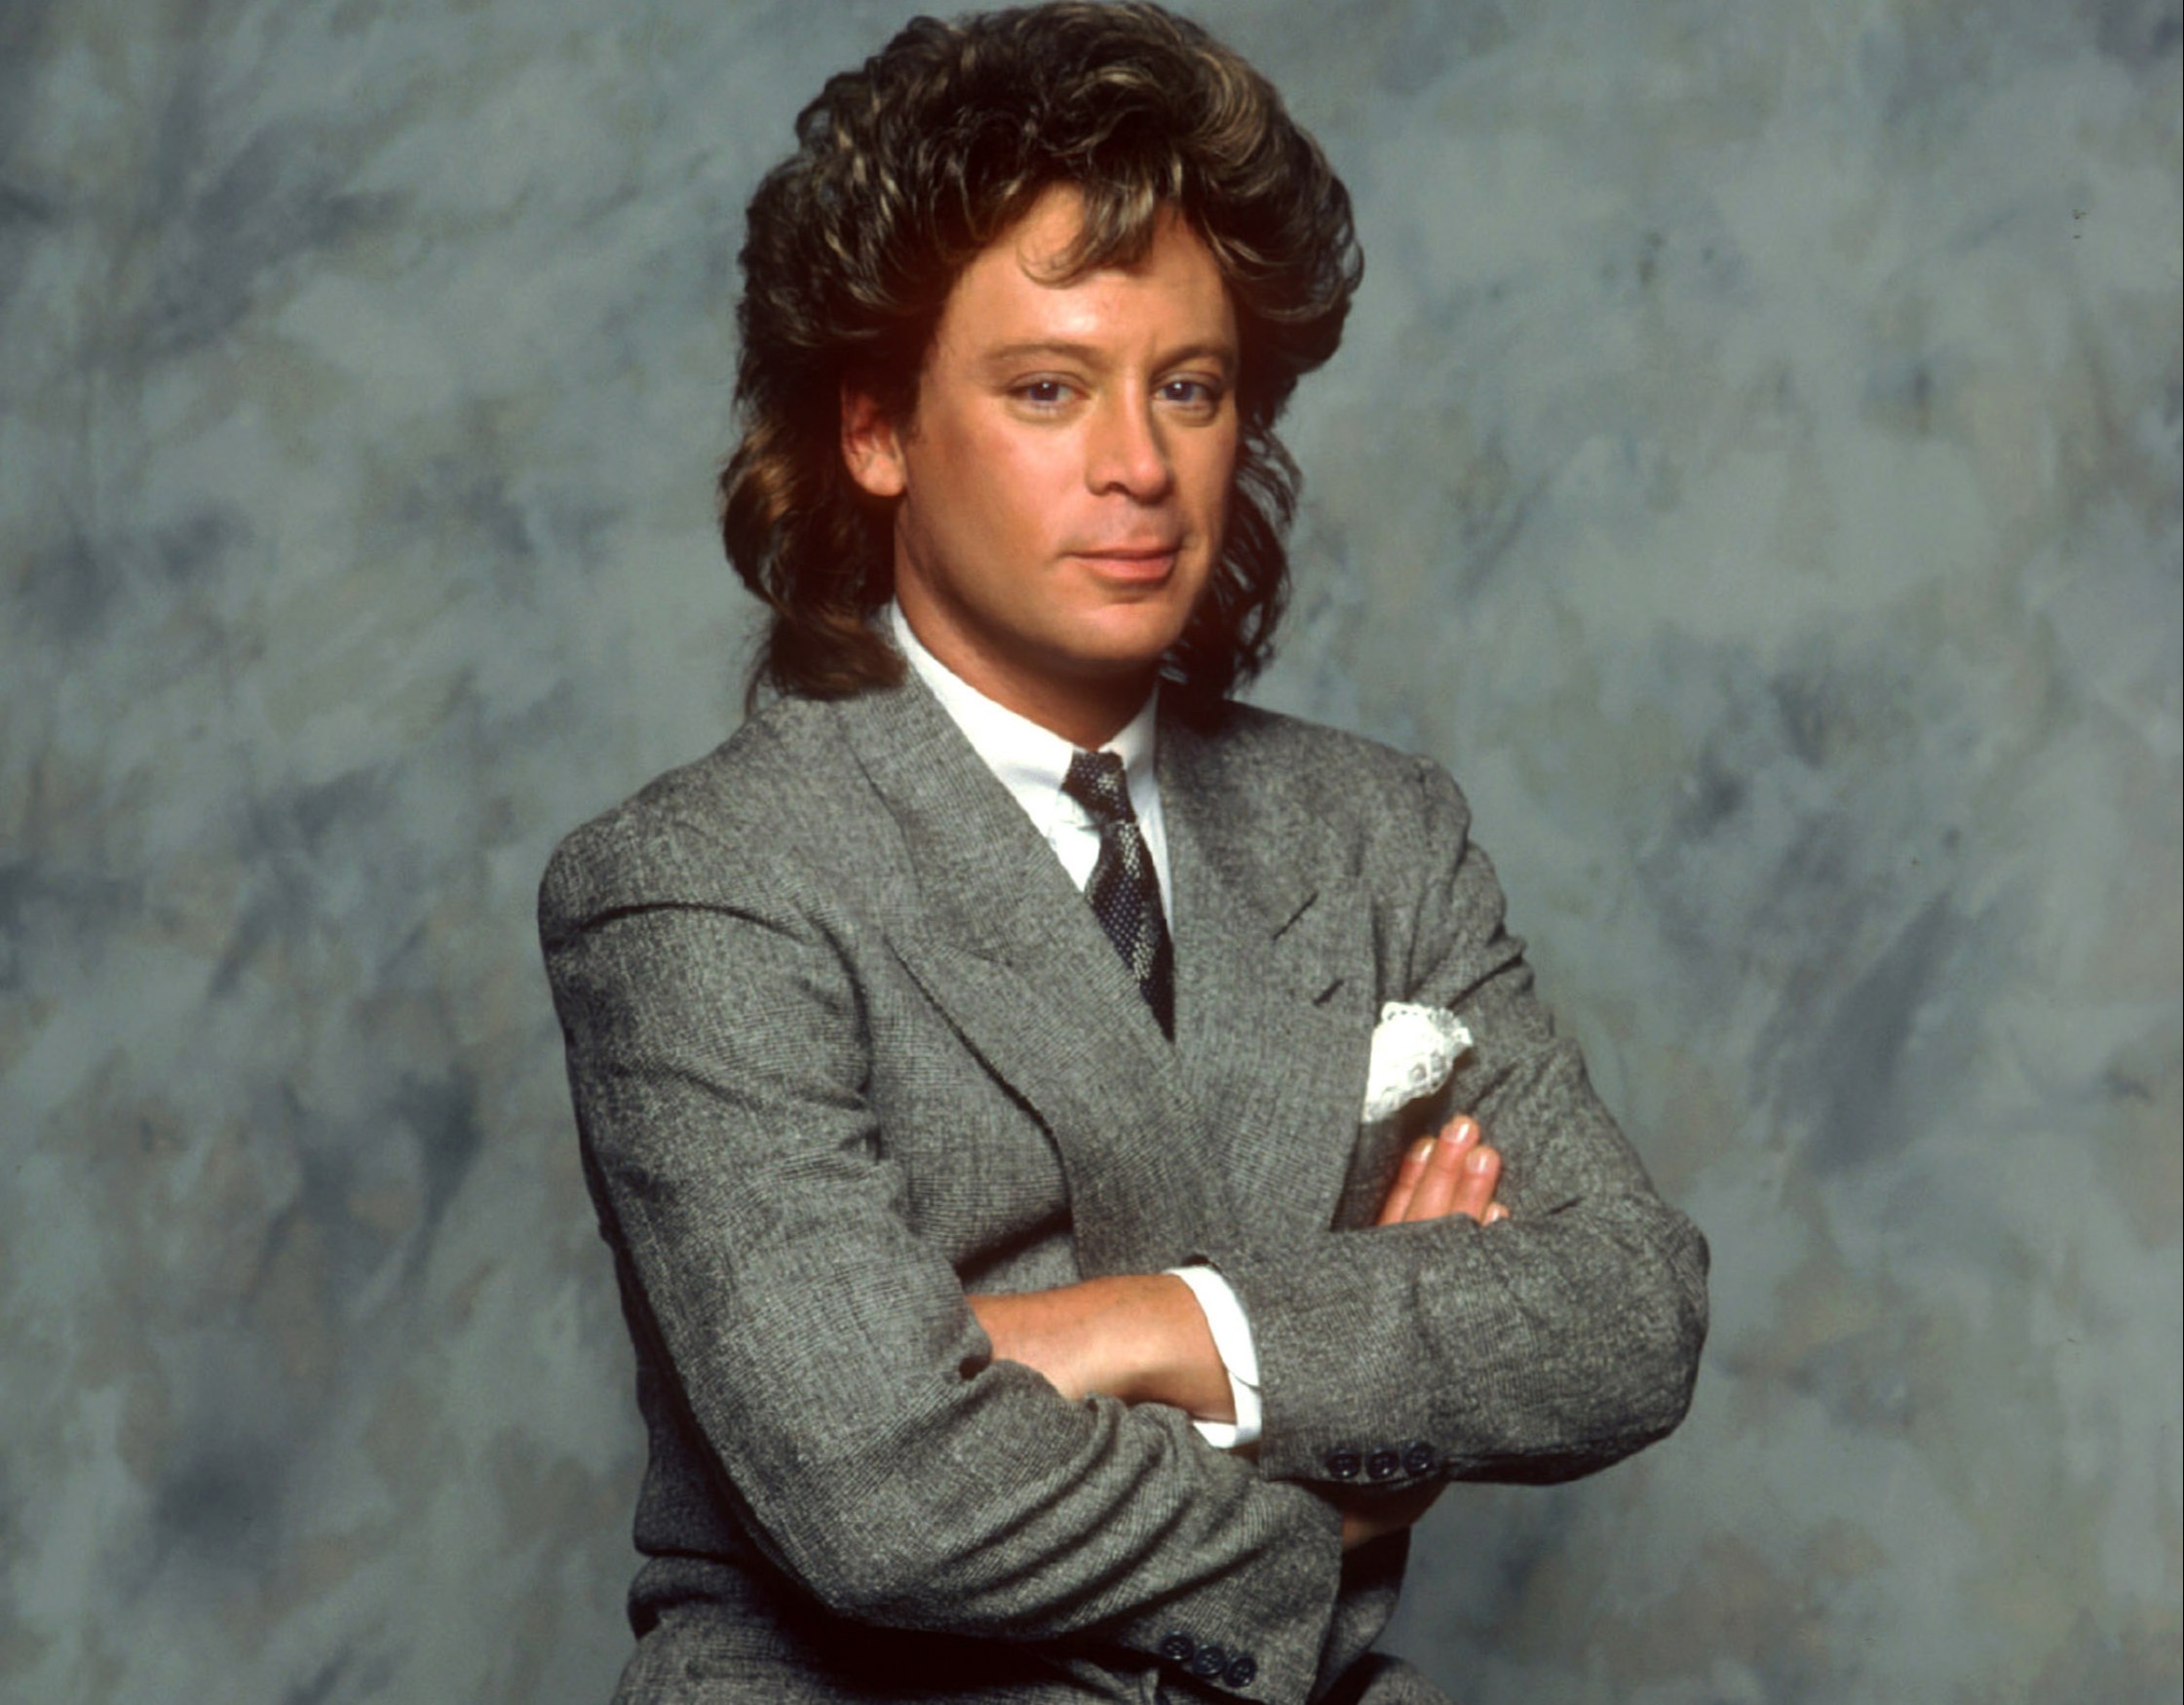 Eric Carmen had two children with his second wife Susan Brown